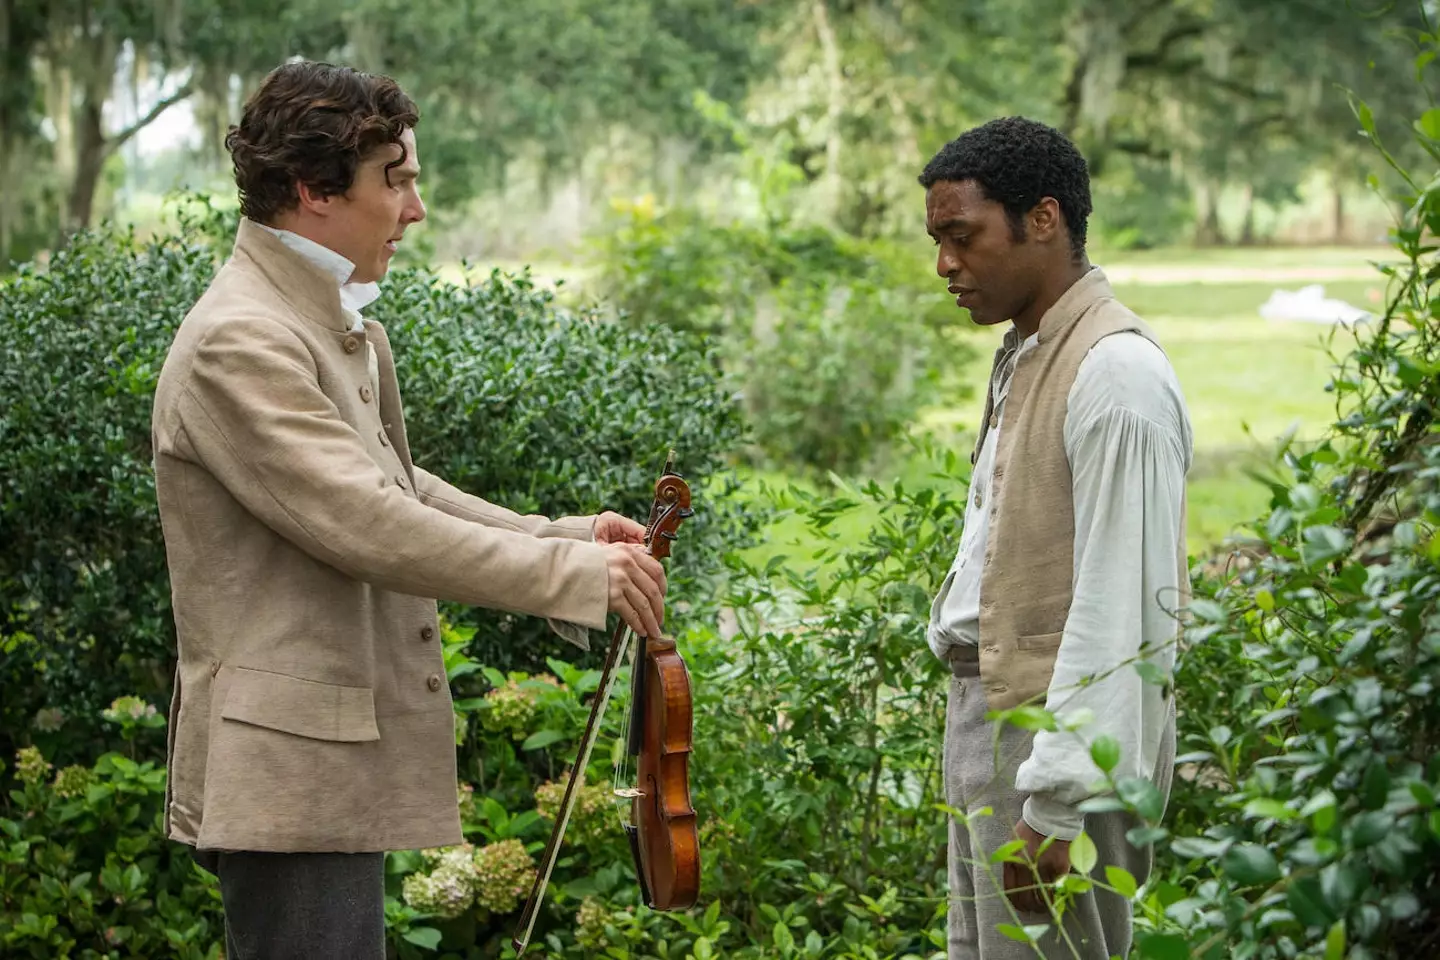 Cumberbatch previously played plantation owner Master William Ford in 12 Years A Slave.